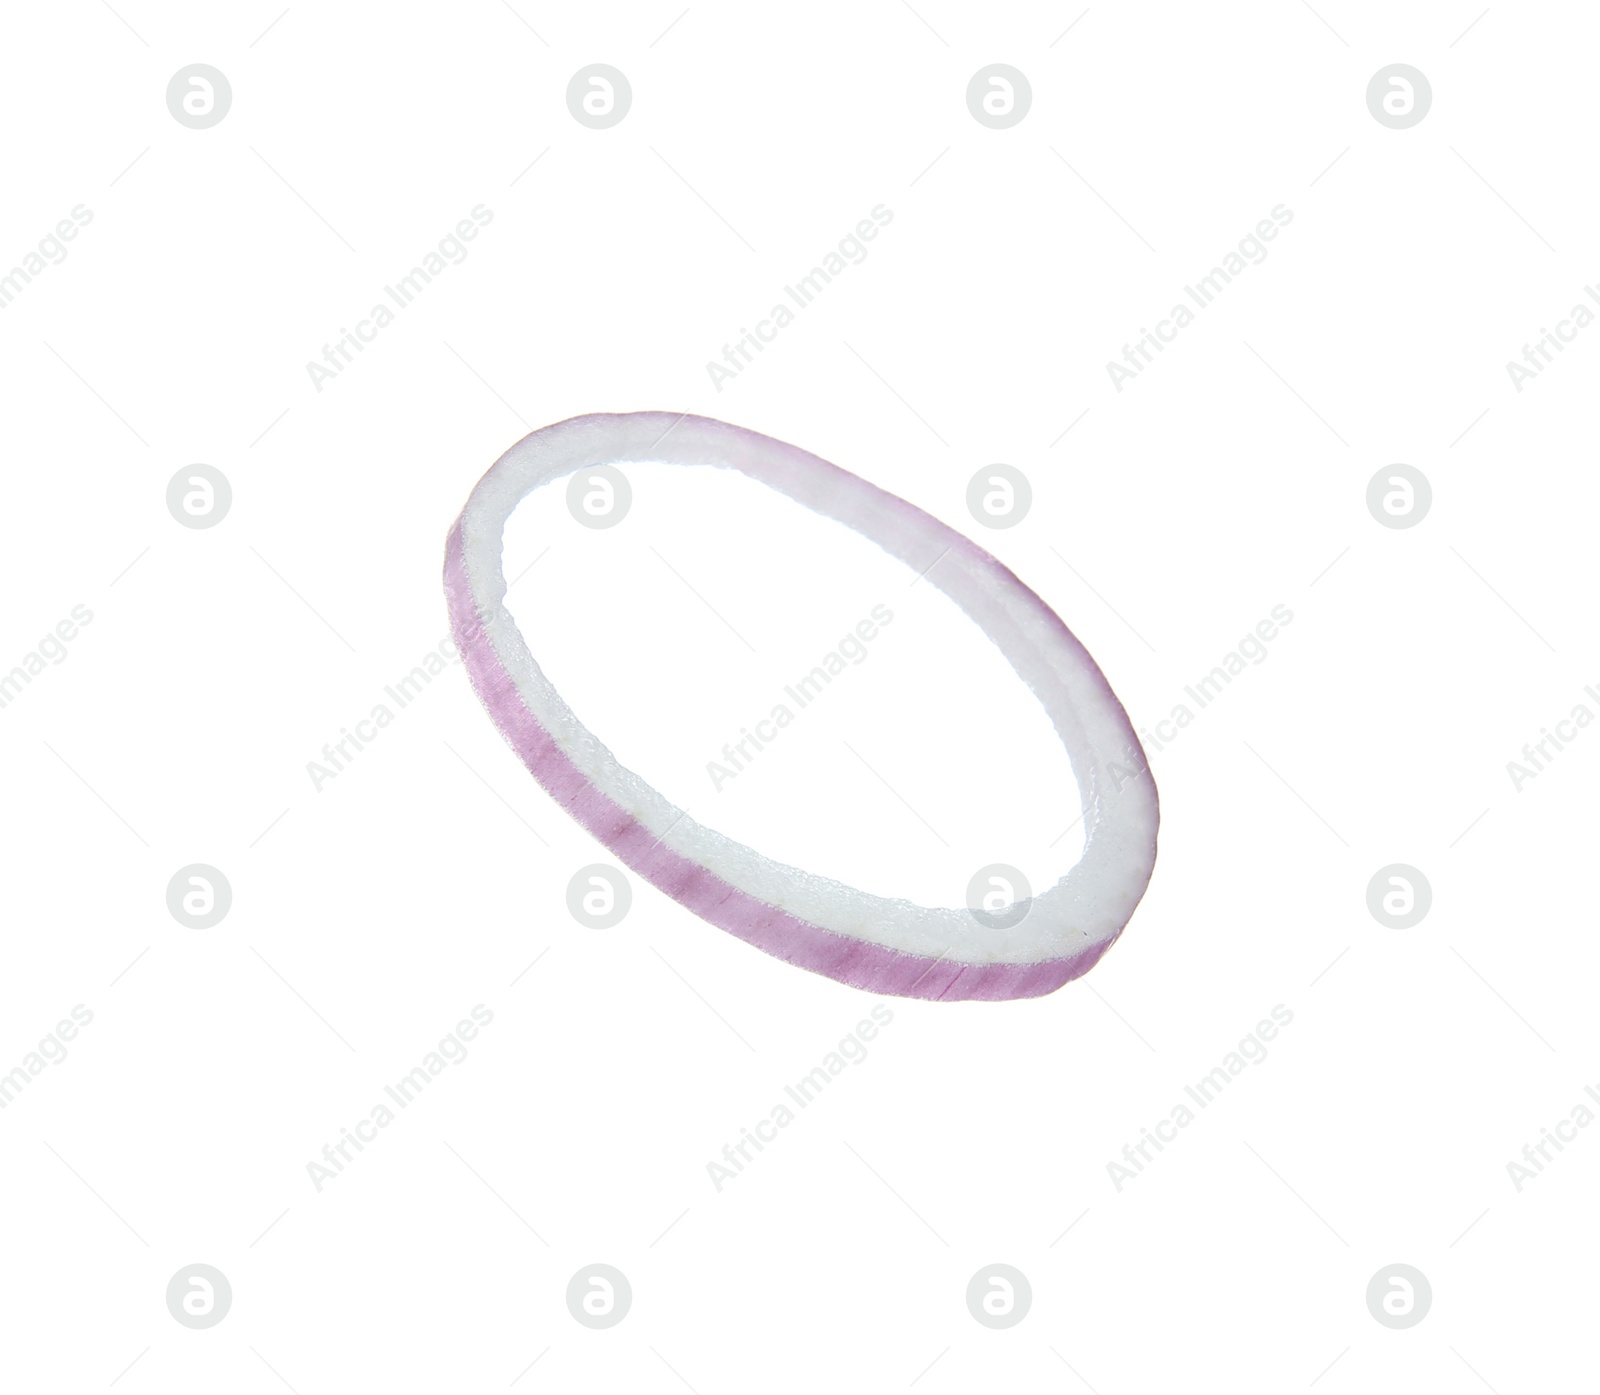 Photo of One red onion ring isolated on white